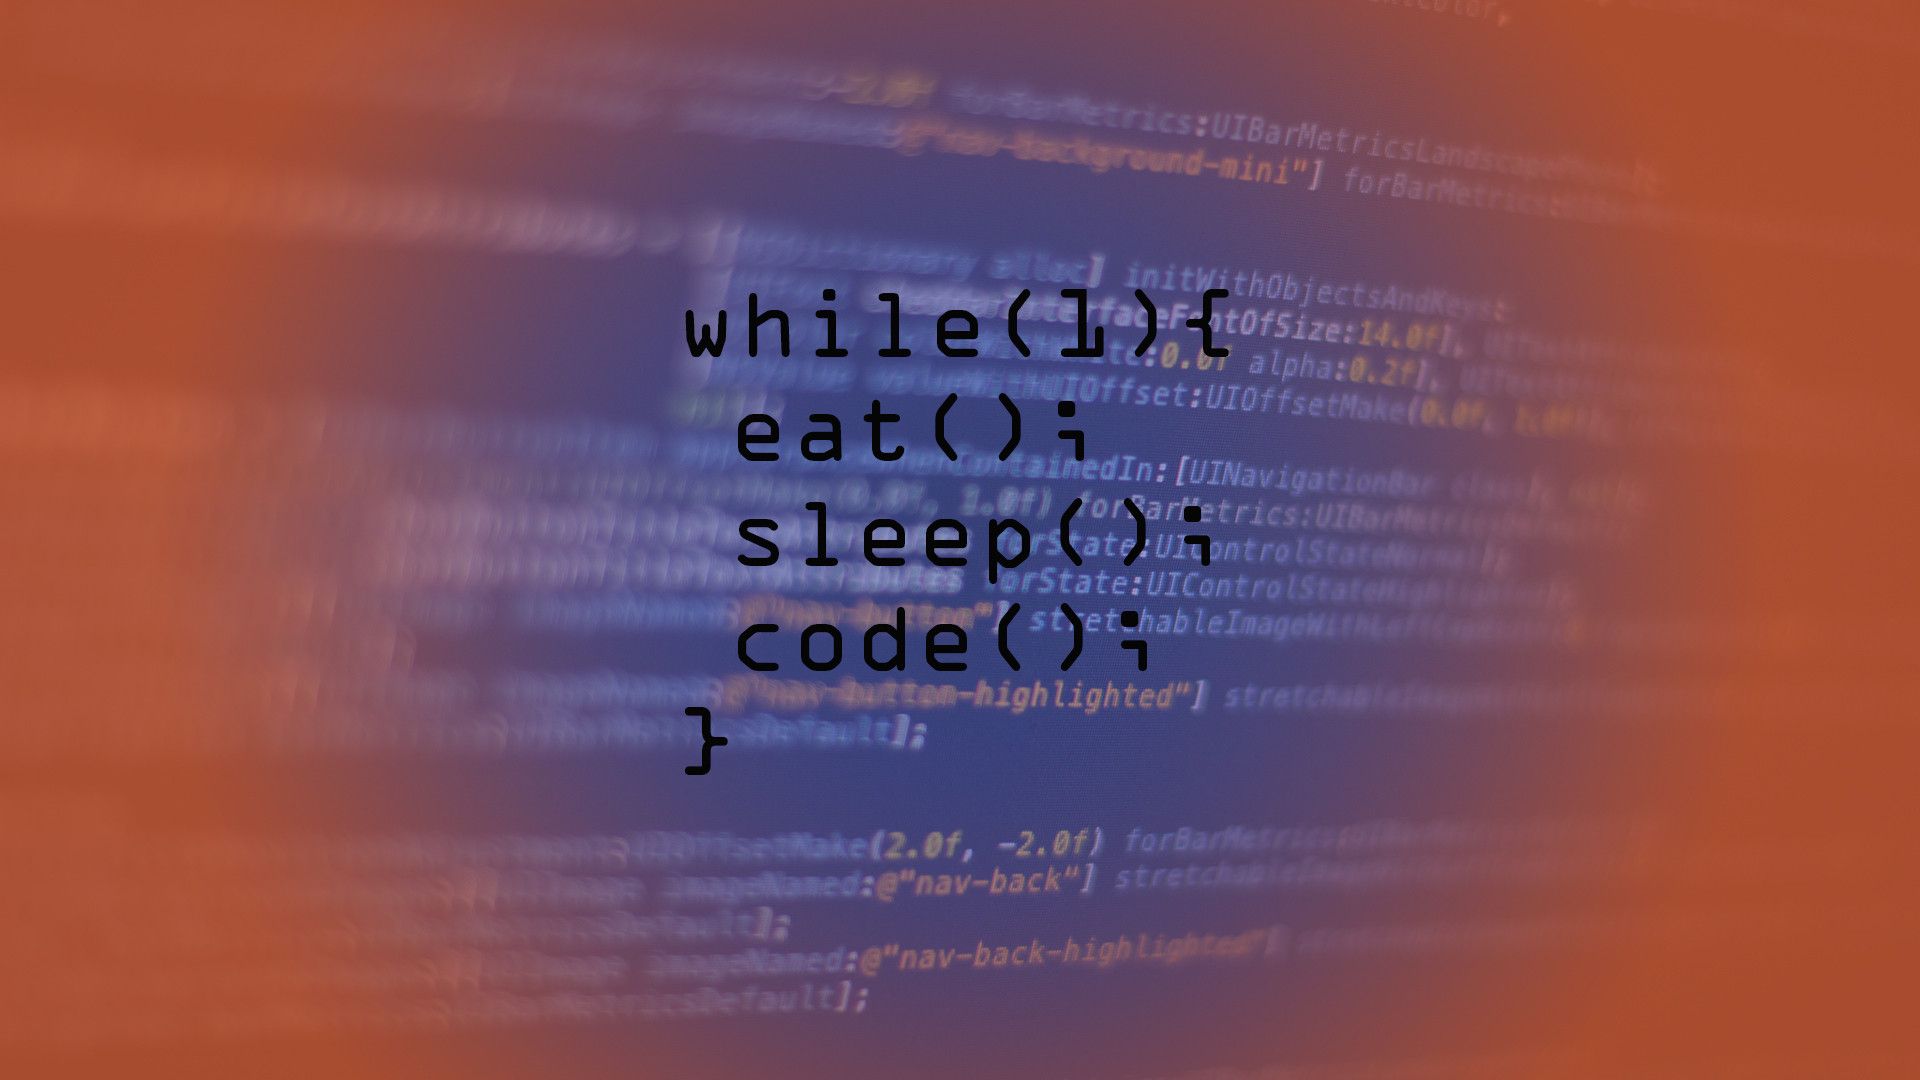 Couldn't find a good coding wallpaper, so I made my own